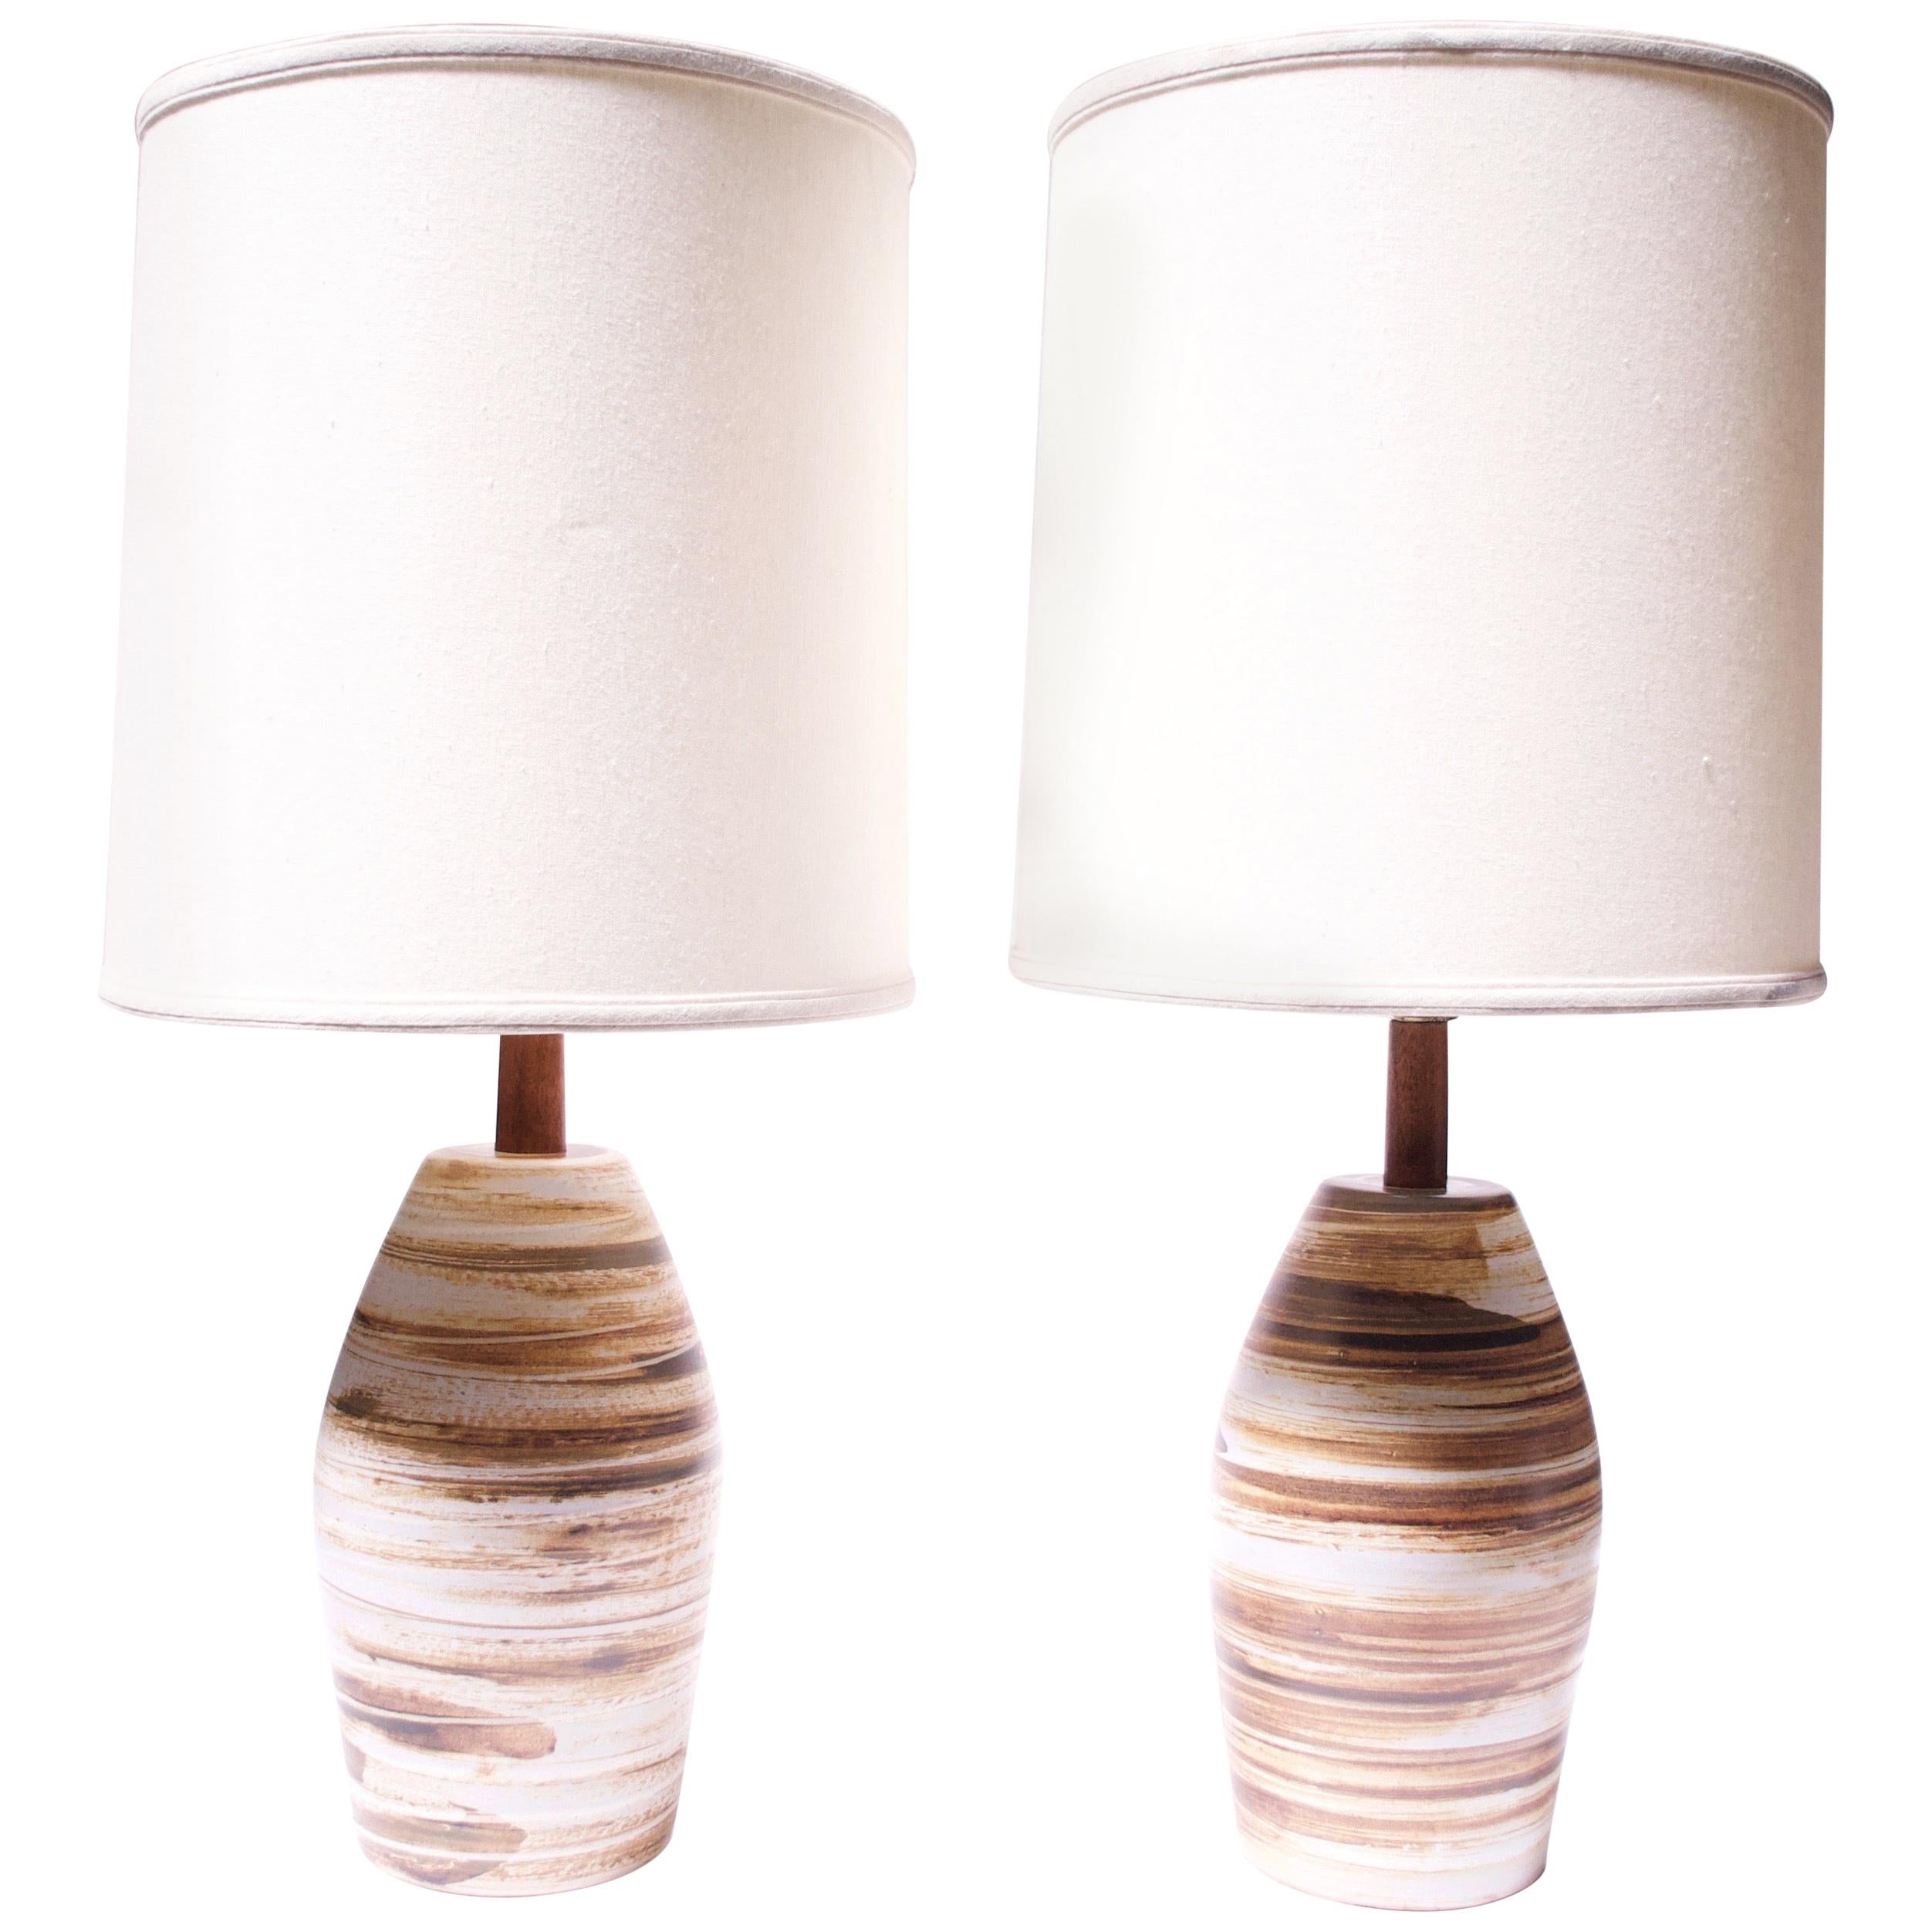 These Gordon and Jane Martz for Marshall Studios table lamps (model #267-28-D116A) feature a matte base in contrasting swirls of tan, brown, cream, and dark green. Etched 'Martz' signature present to both.
Given the handmade nature of these items,